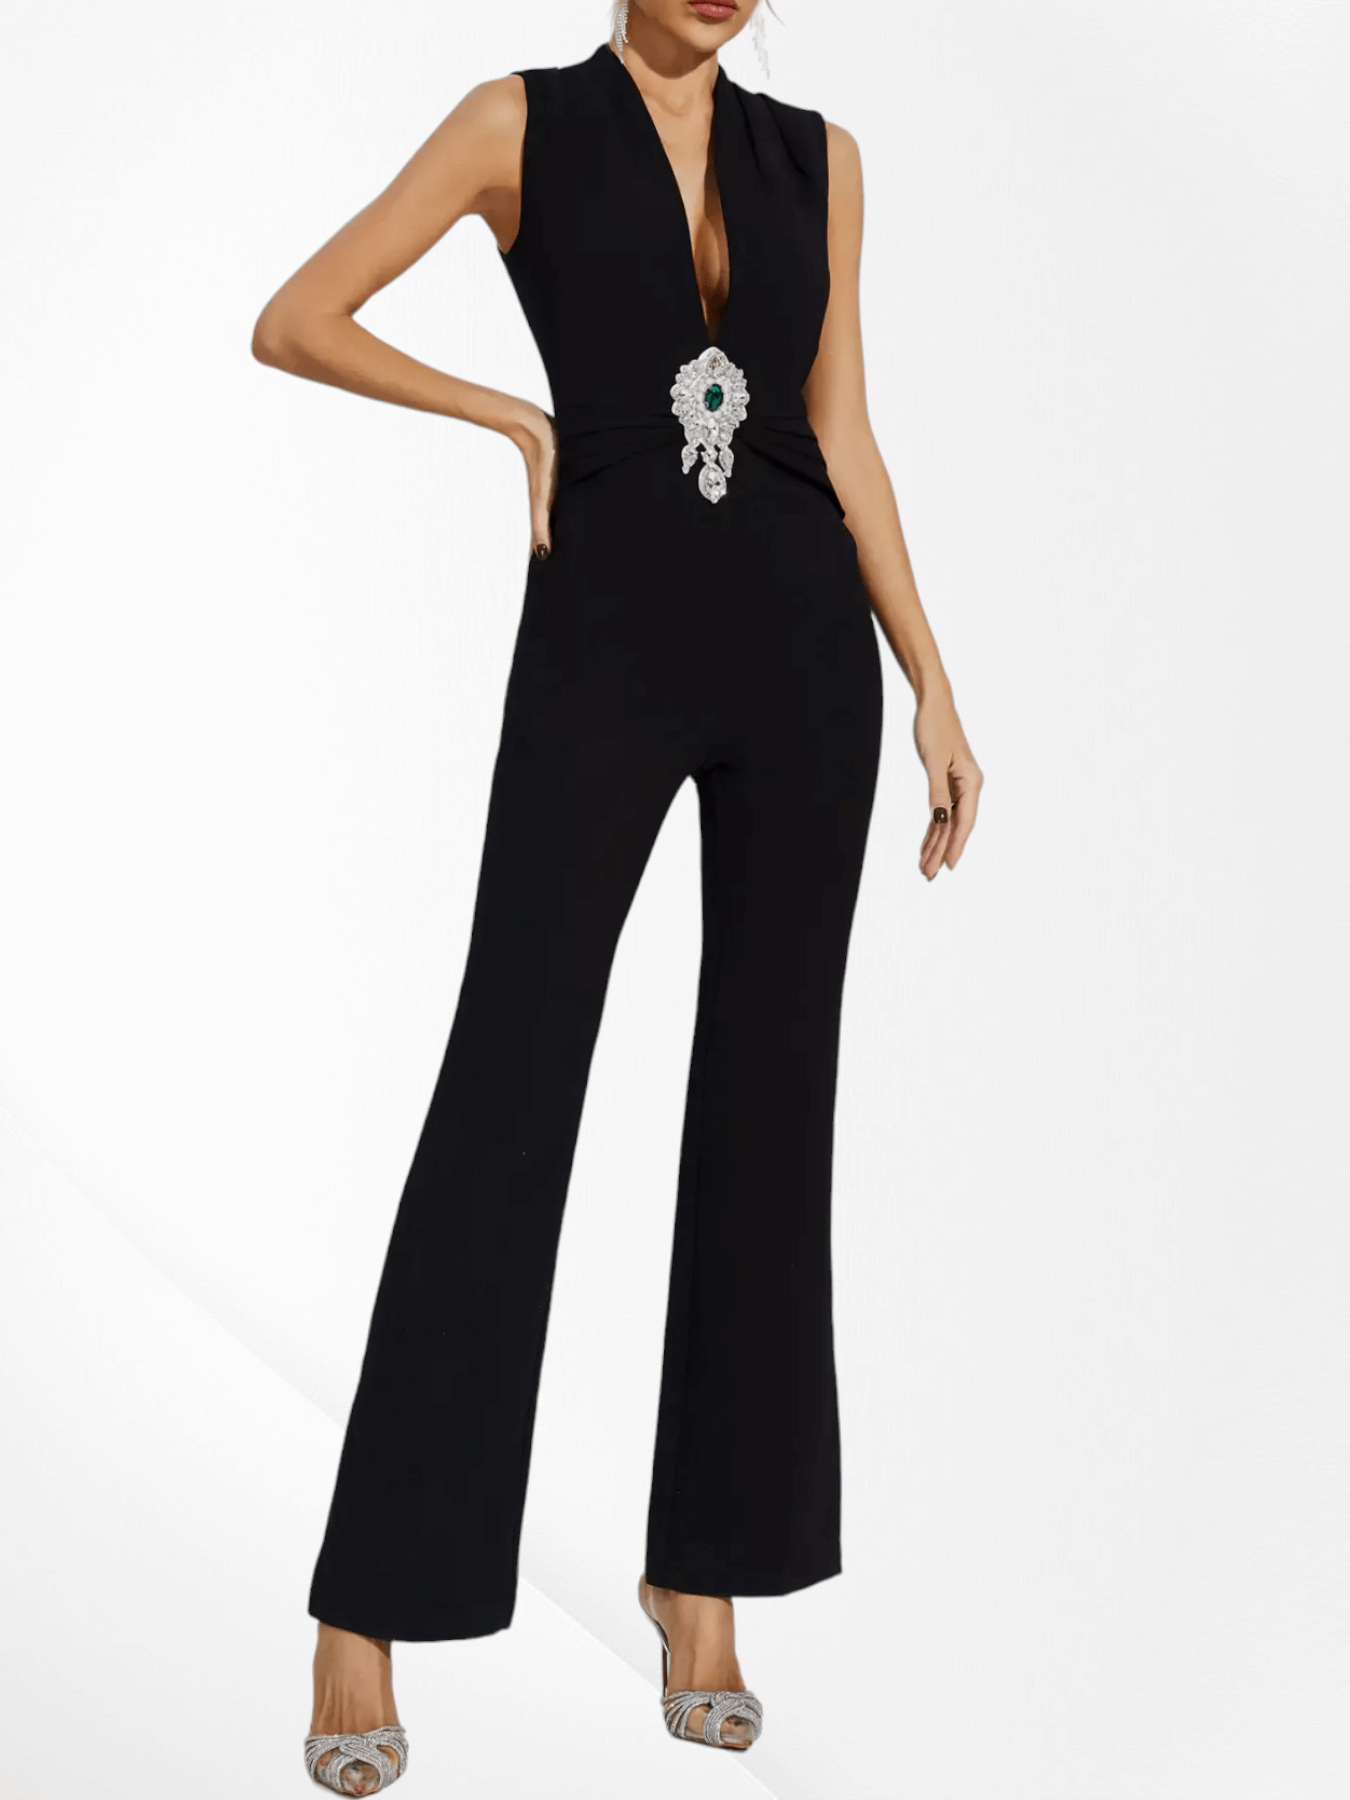 Stunning jumpsuit adorned with intricate beaded diamond embellishments for a glamorous look